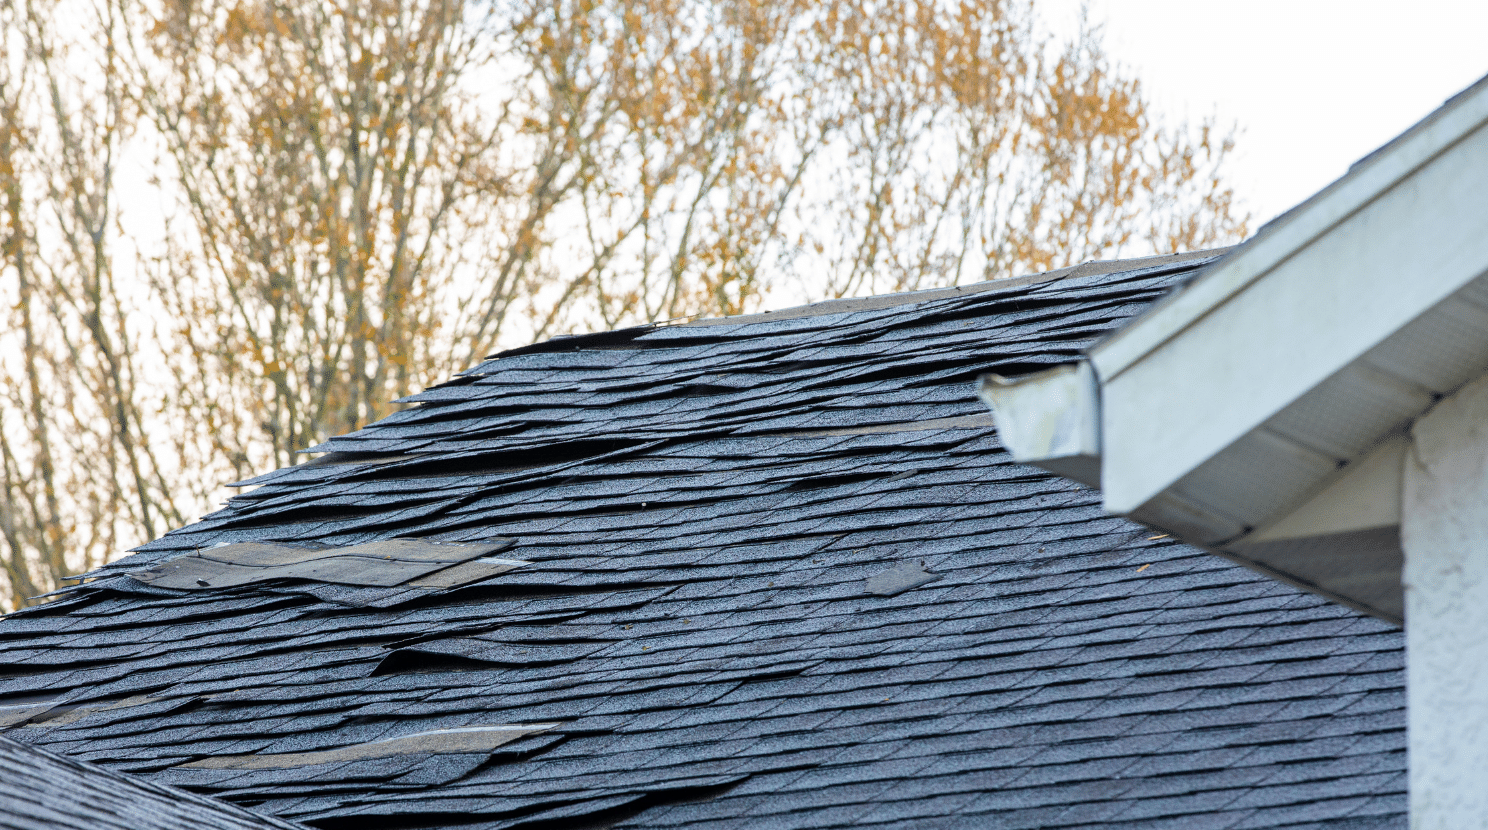 Can The Wind Damage My Pittsburgh Roof: olf rood